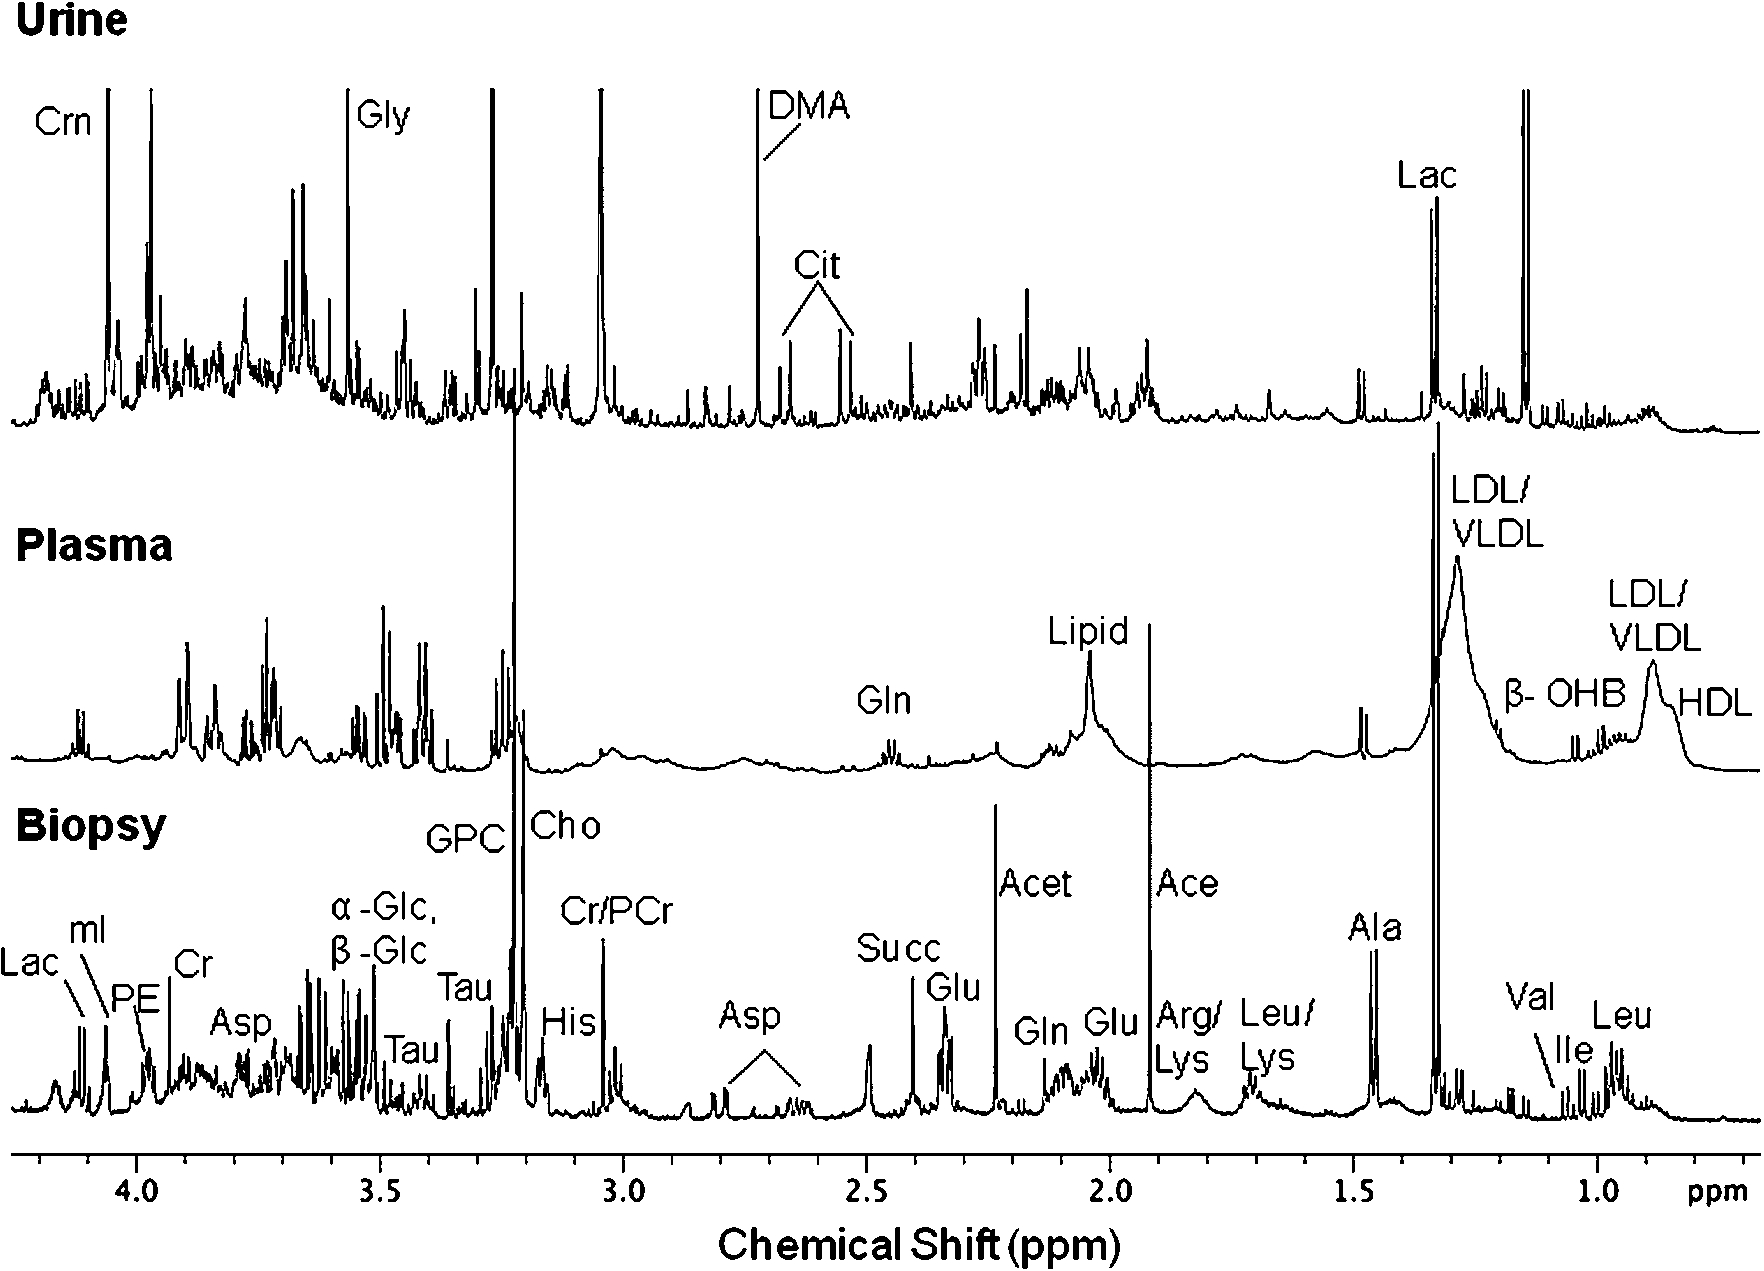 Expanded aliphatic region (0.5–4.2 ppm) of 1D 1H NMR spectra acquired at 700 MHz in D2O at 25°C of (a) perchloric acid extract of intestinal mucosal biopsy, (b) blood plasma, and (c) urine obtained from a patient with CeD. Abbreviations used: HDL – high density lipoprotein; LDL – low density lipoprotein; VLDL – very low density lipoprotein; Leu – leucine; Ile – isoleucine; Val – valine; β-OHB – β-hydroxy-butyrate; Lac – Lactate; Ala – alanine; Lys – lysine; Arg – arginine; Ace – acetate; Glu – glutamate; Gln – glutamine; Acet – aacetoacetate; Succ – succinate; Cit – citrate; DMA – dimethyamine; Asp – aspartate; Cr – creatine; PCr – phosphocreatine; His – histidine; Cho – choline; GPC – glycerophosphocholine; Tau – Taurine; Gly – glycine; Glc – glucose; mI – myo-inositol; Crn – Creatinine; PE – phosphoethanolamine.